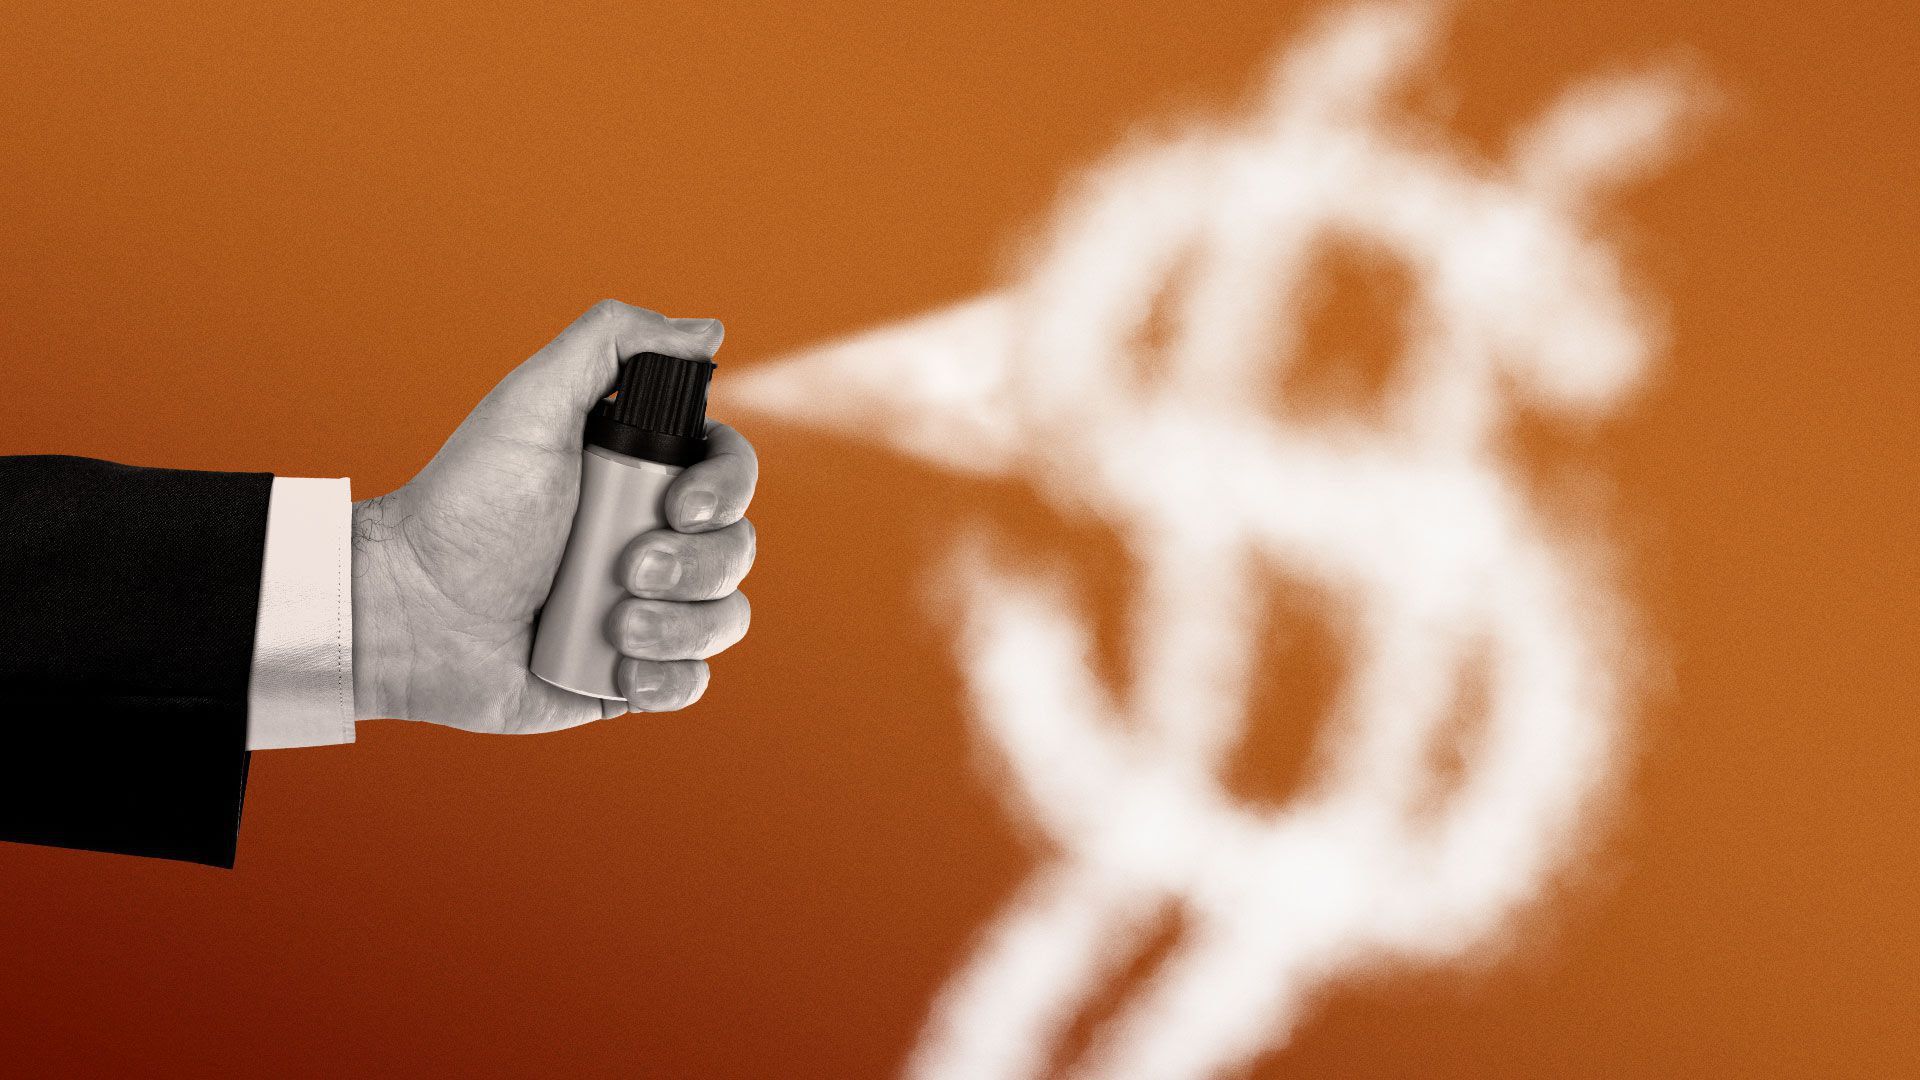 Illustration of a hand spraying a bottle and the gas comes out in the shape of a money sign